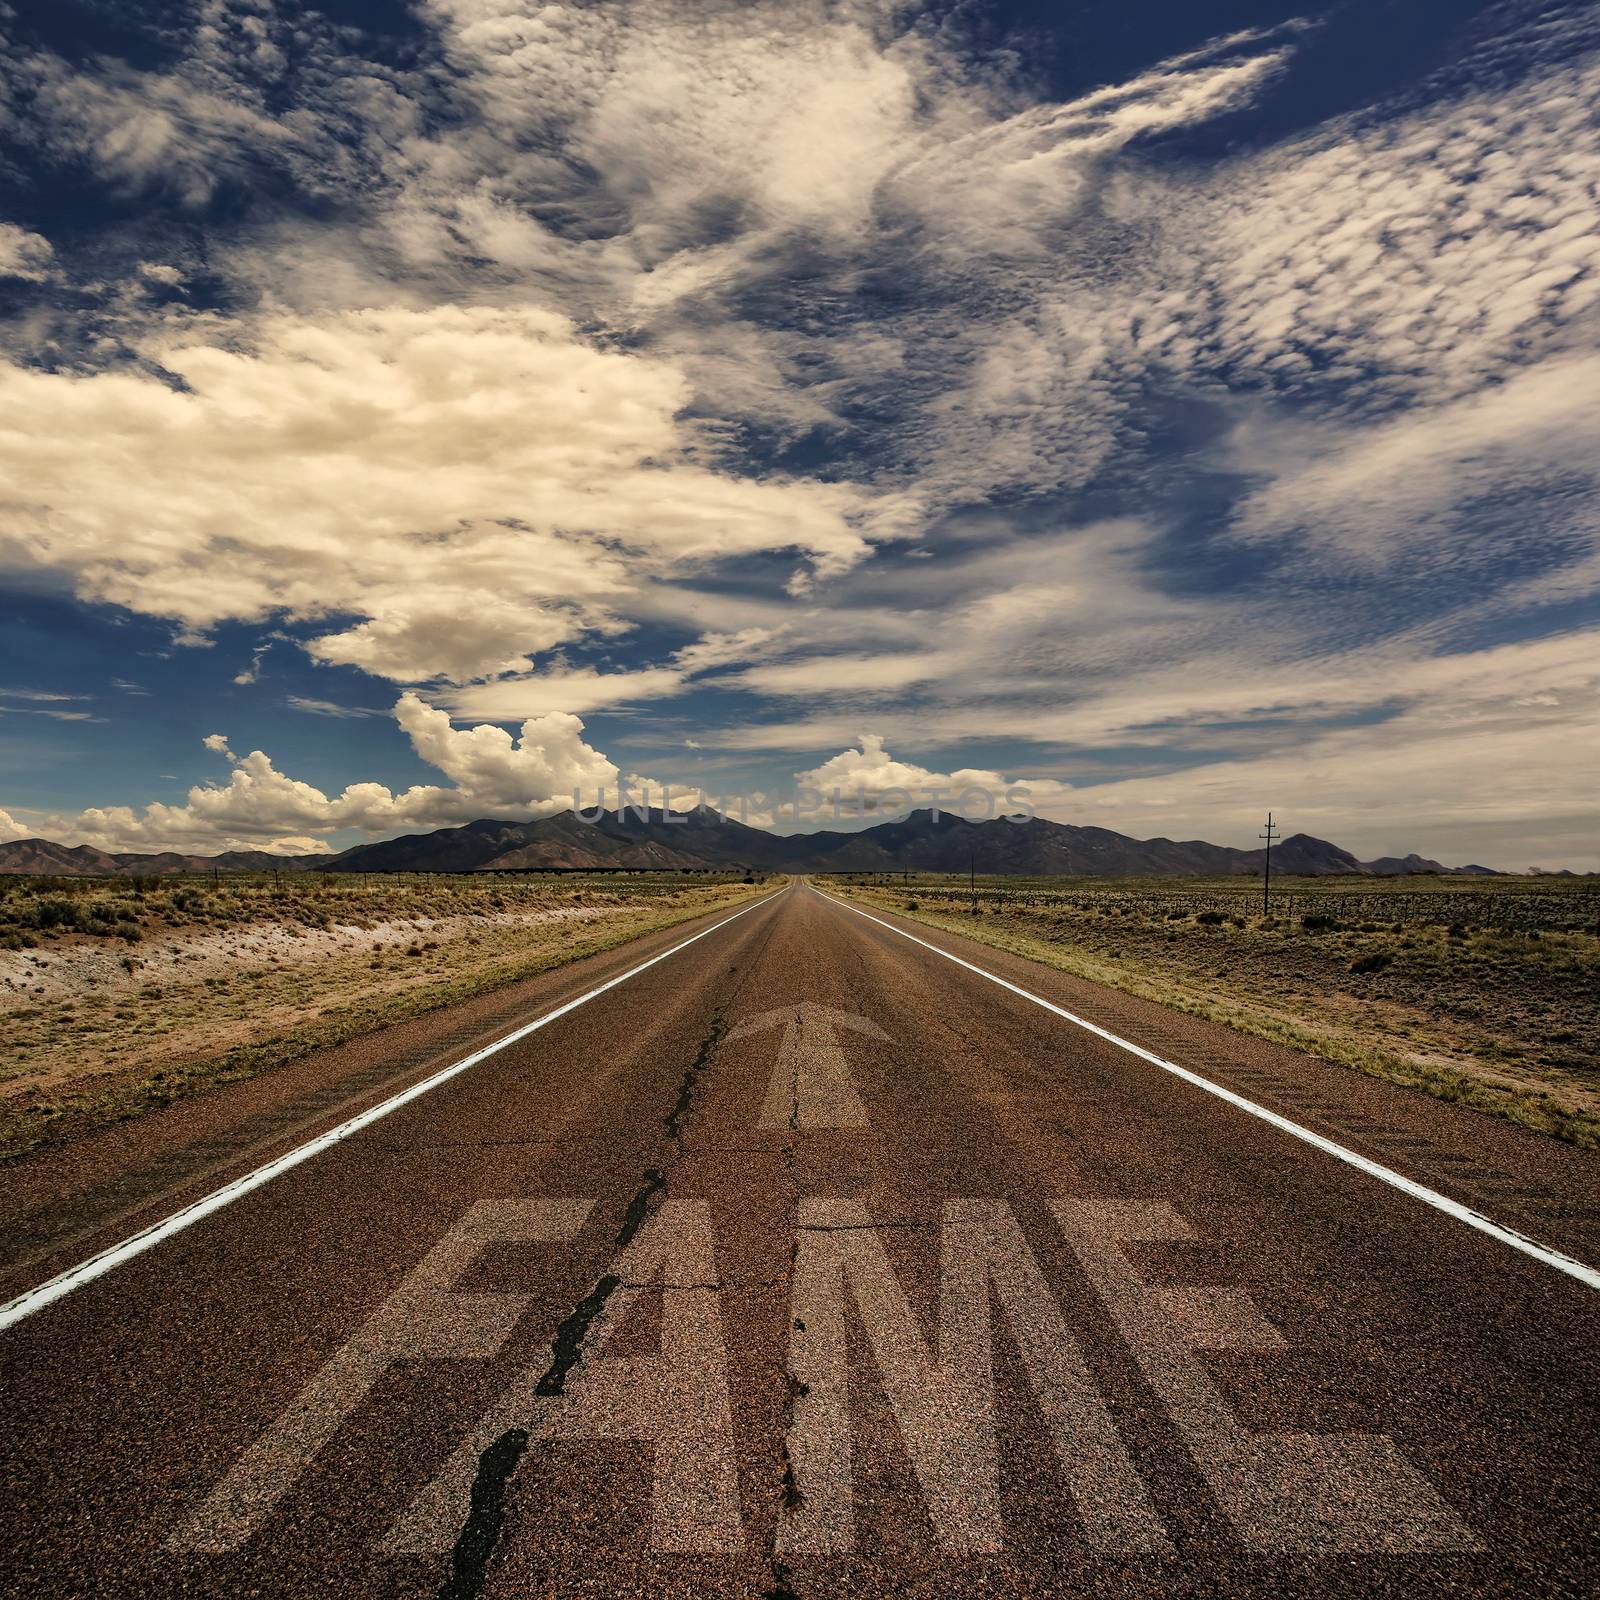 Conceptual image of desert road with the word fame and arrow